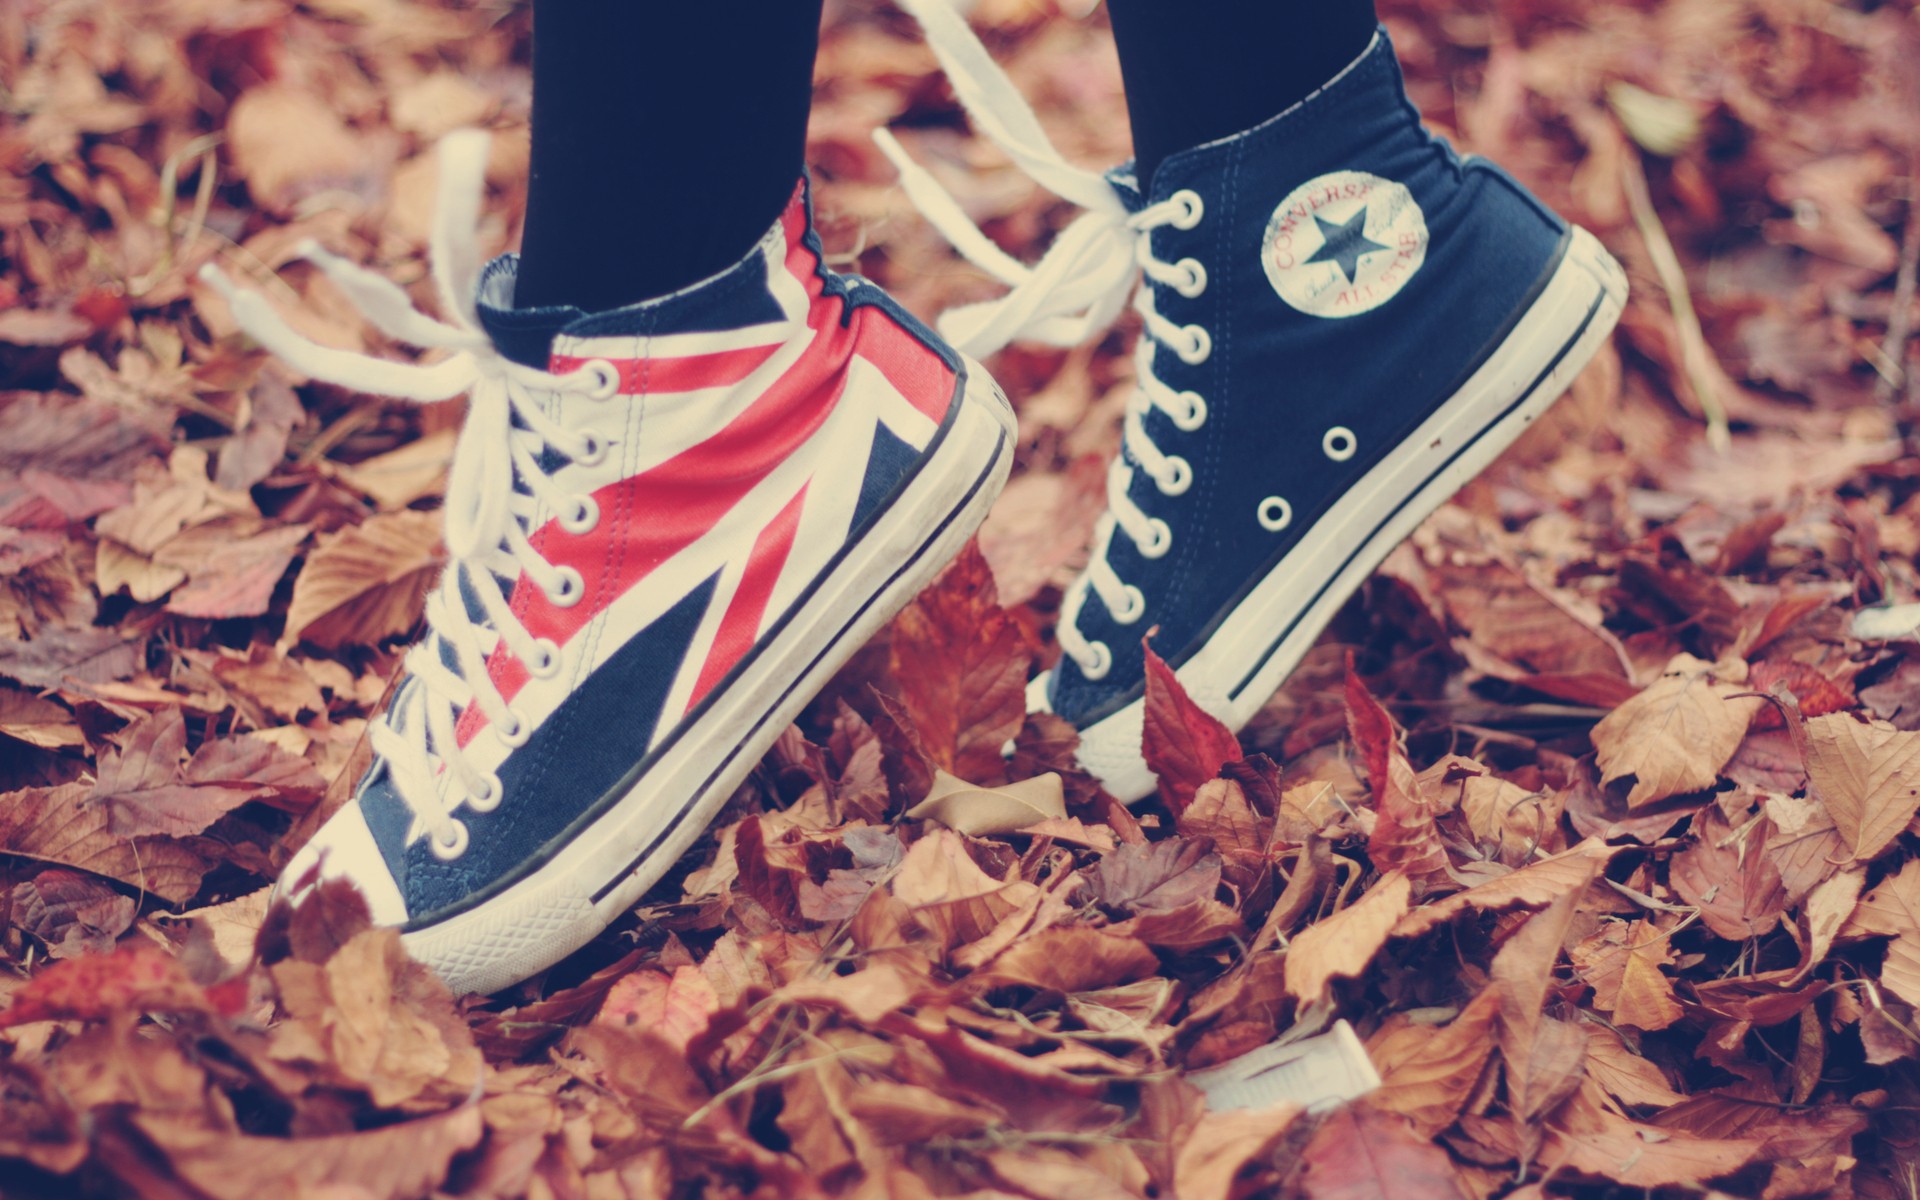 Fall All Star Fallen Leaves Converse Union Jack Shoes Leaves 1920x1200